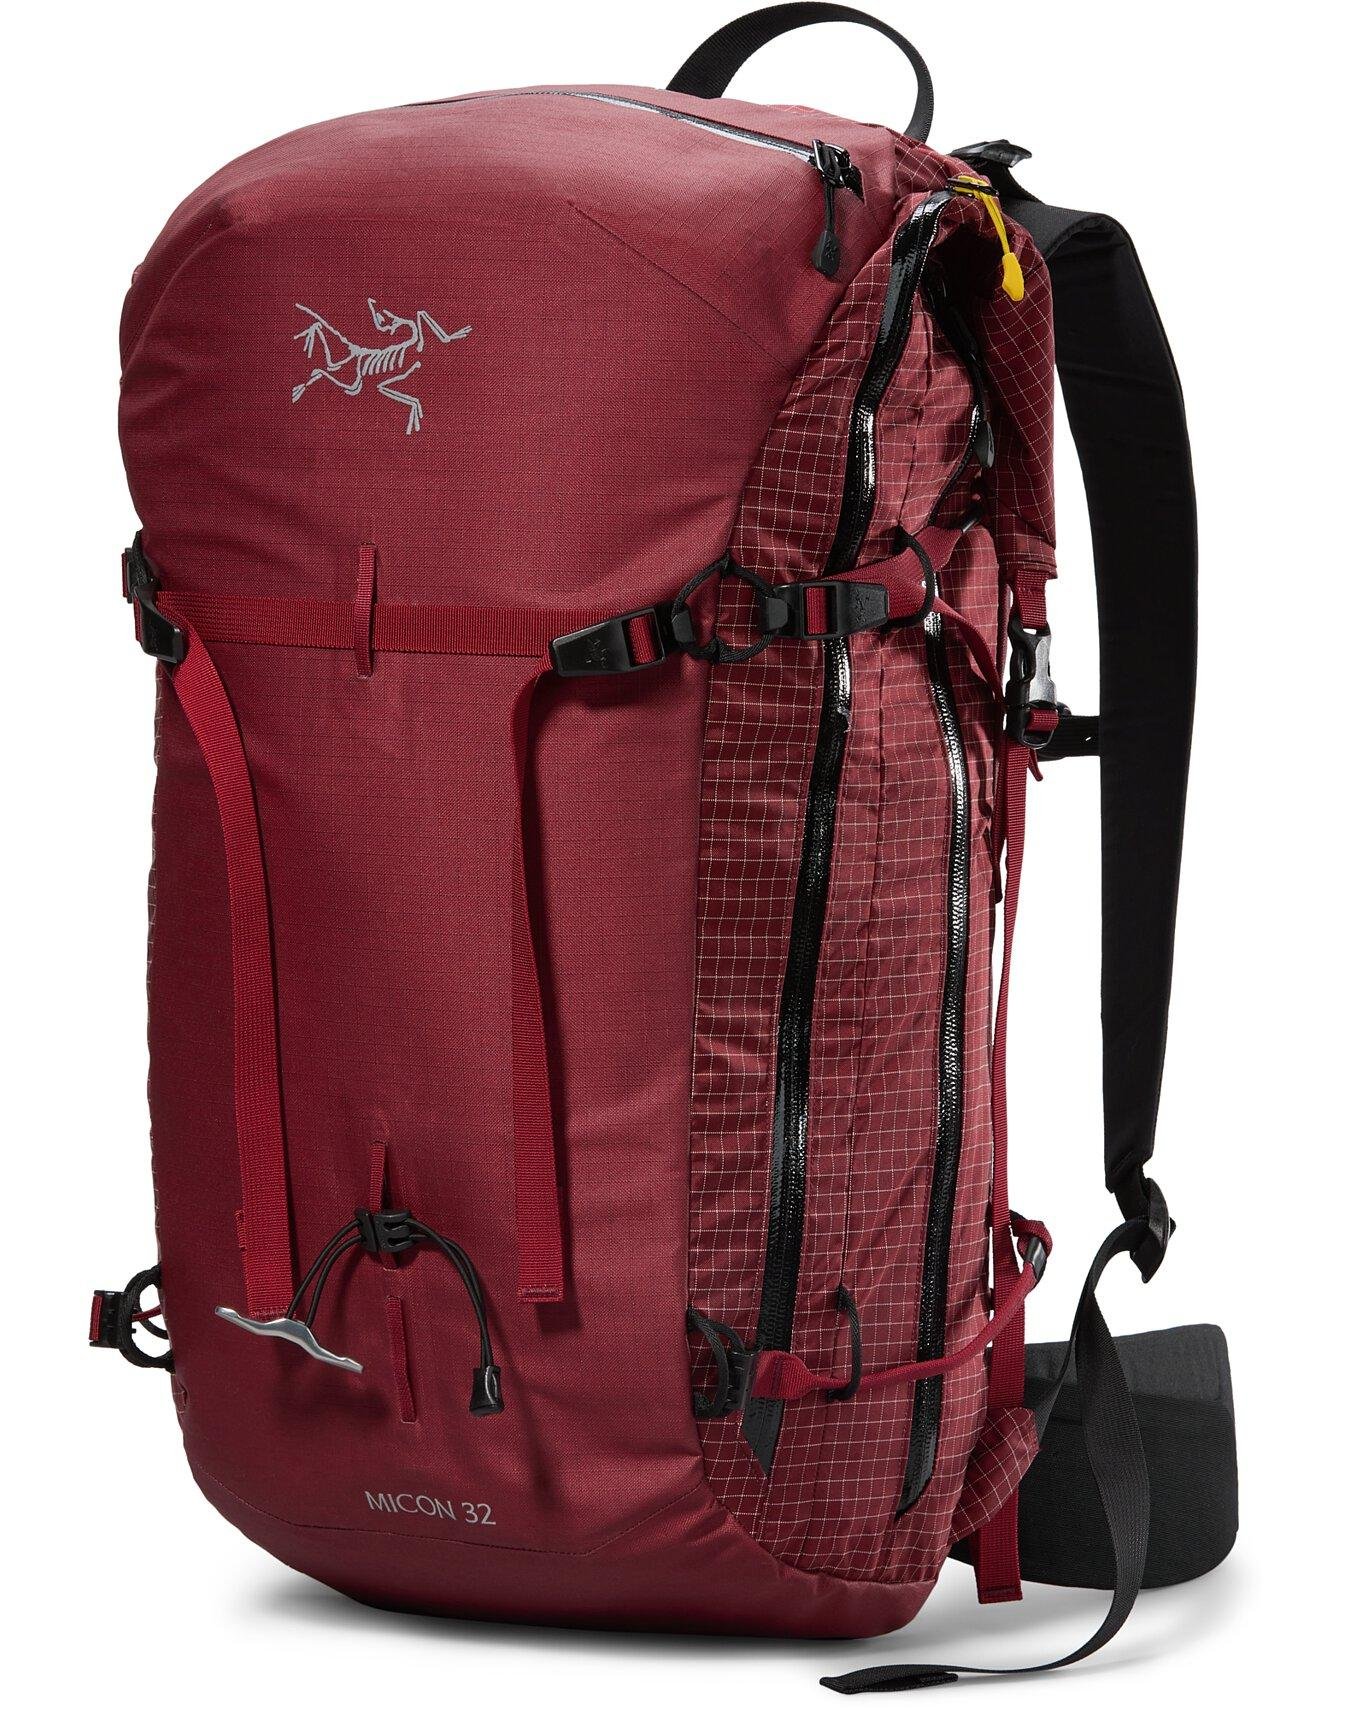 Micon 32 Backpack by ARC'TERYX